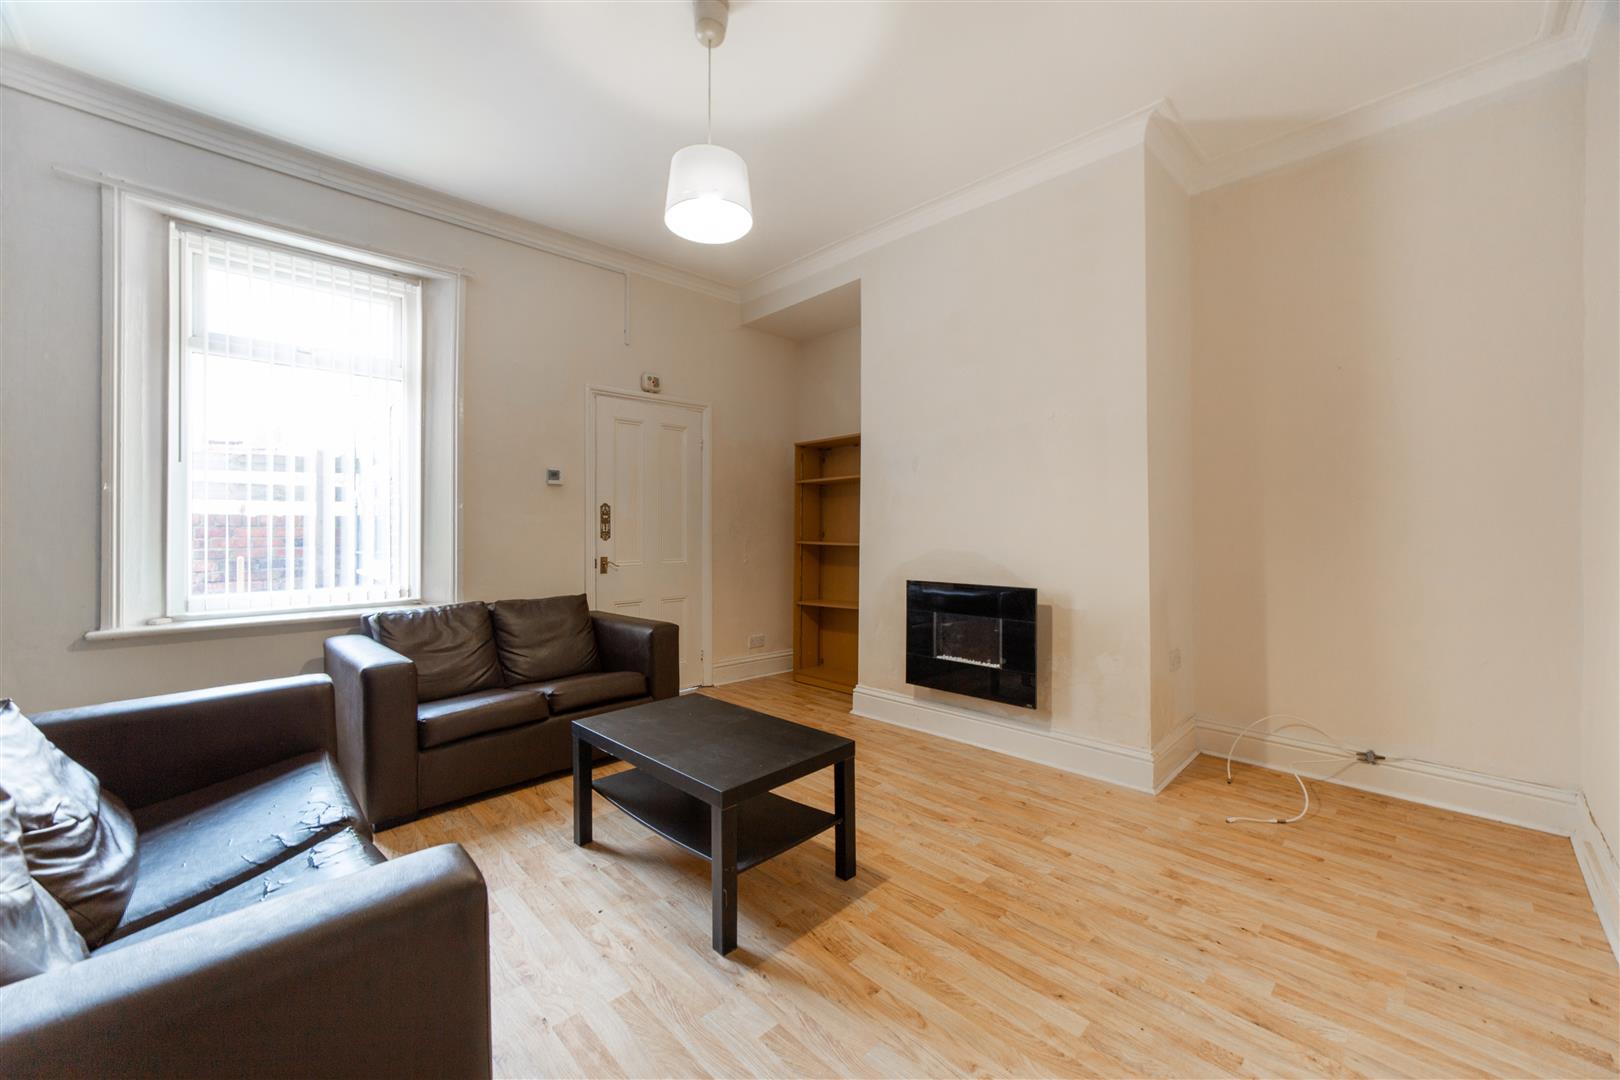 2 bed flat to rent in Second Avenue, Newcastle Upon Tyne, NE6 